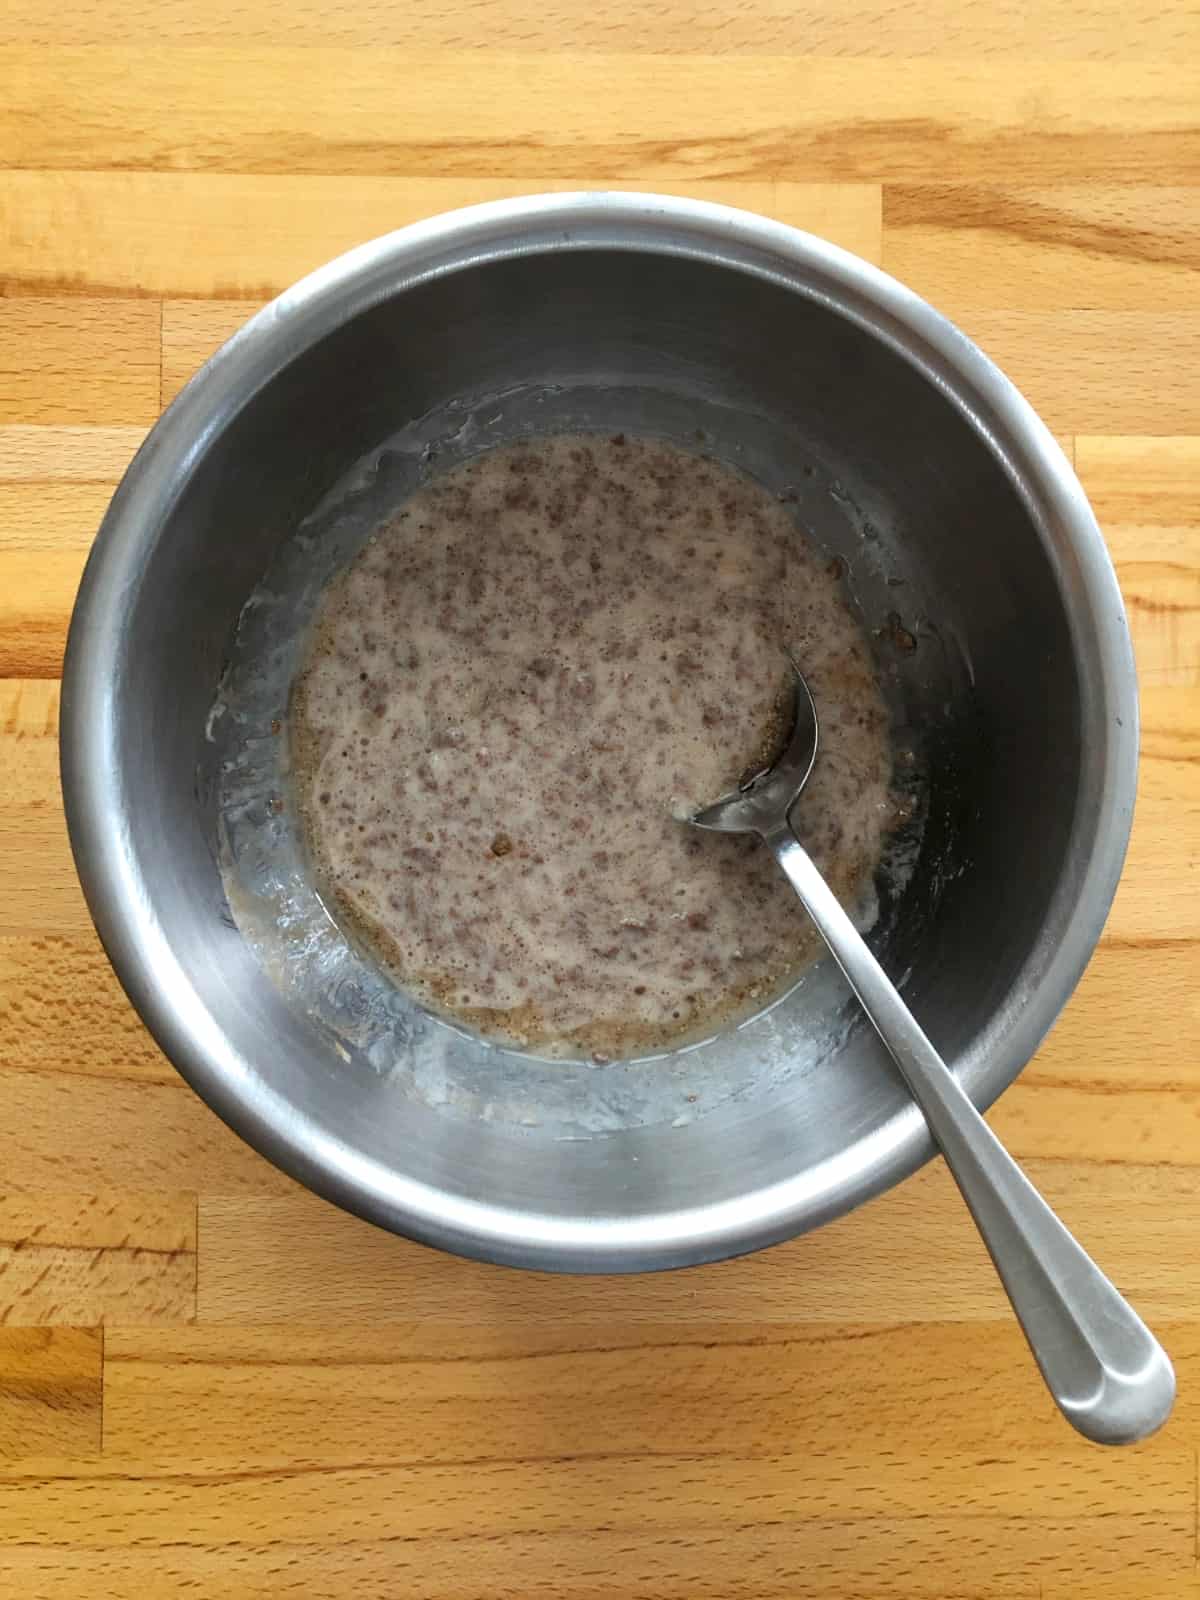 Mixing batter in stainless steel bowl with spoon for making blueberry bran muffin tops.